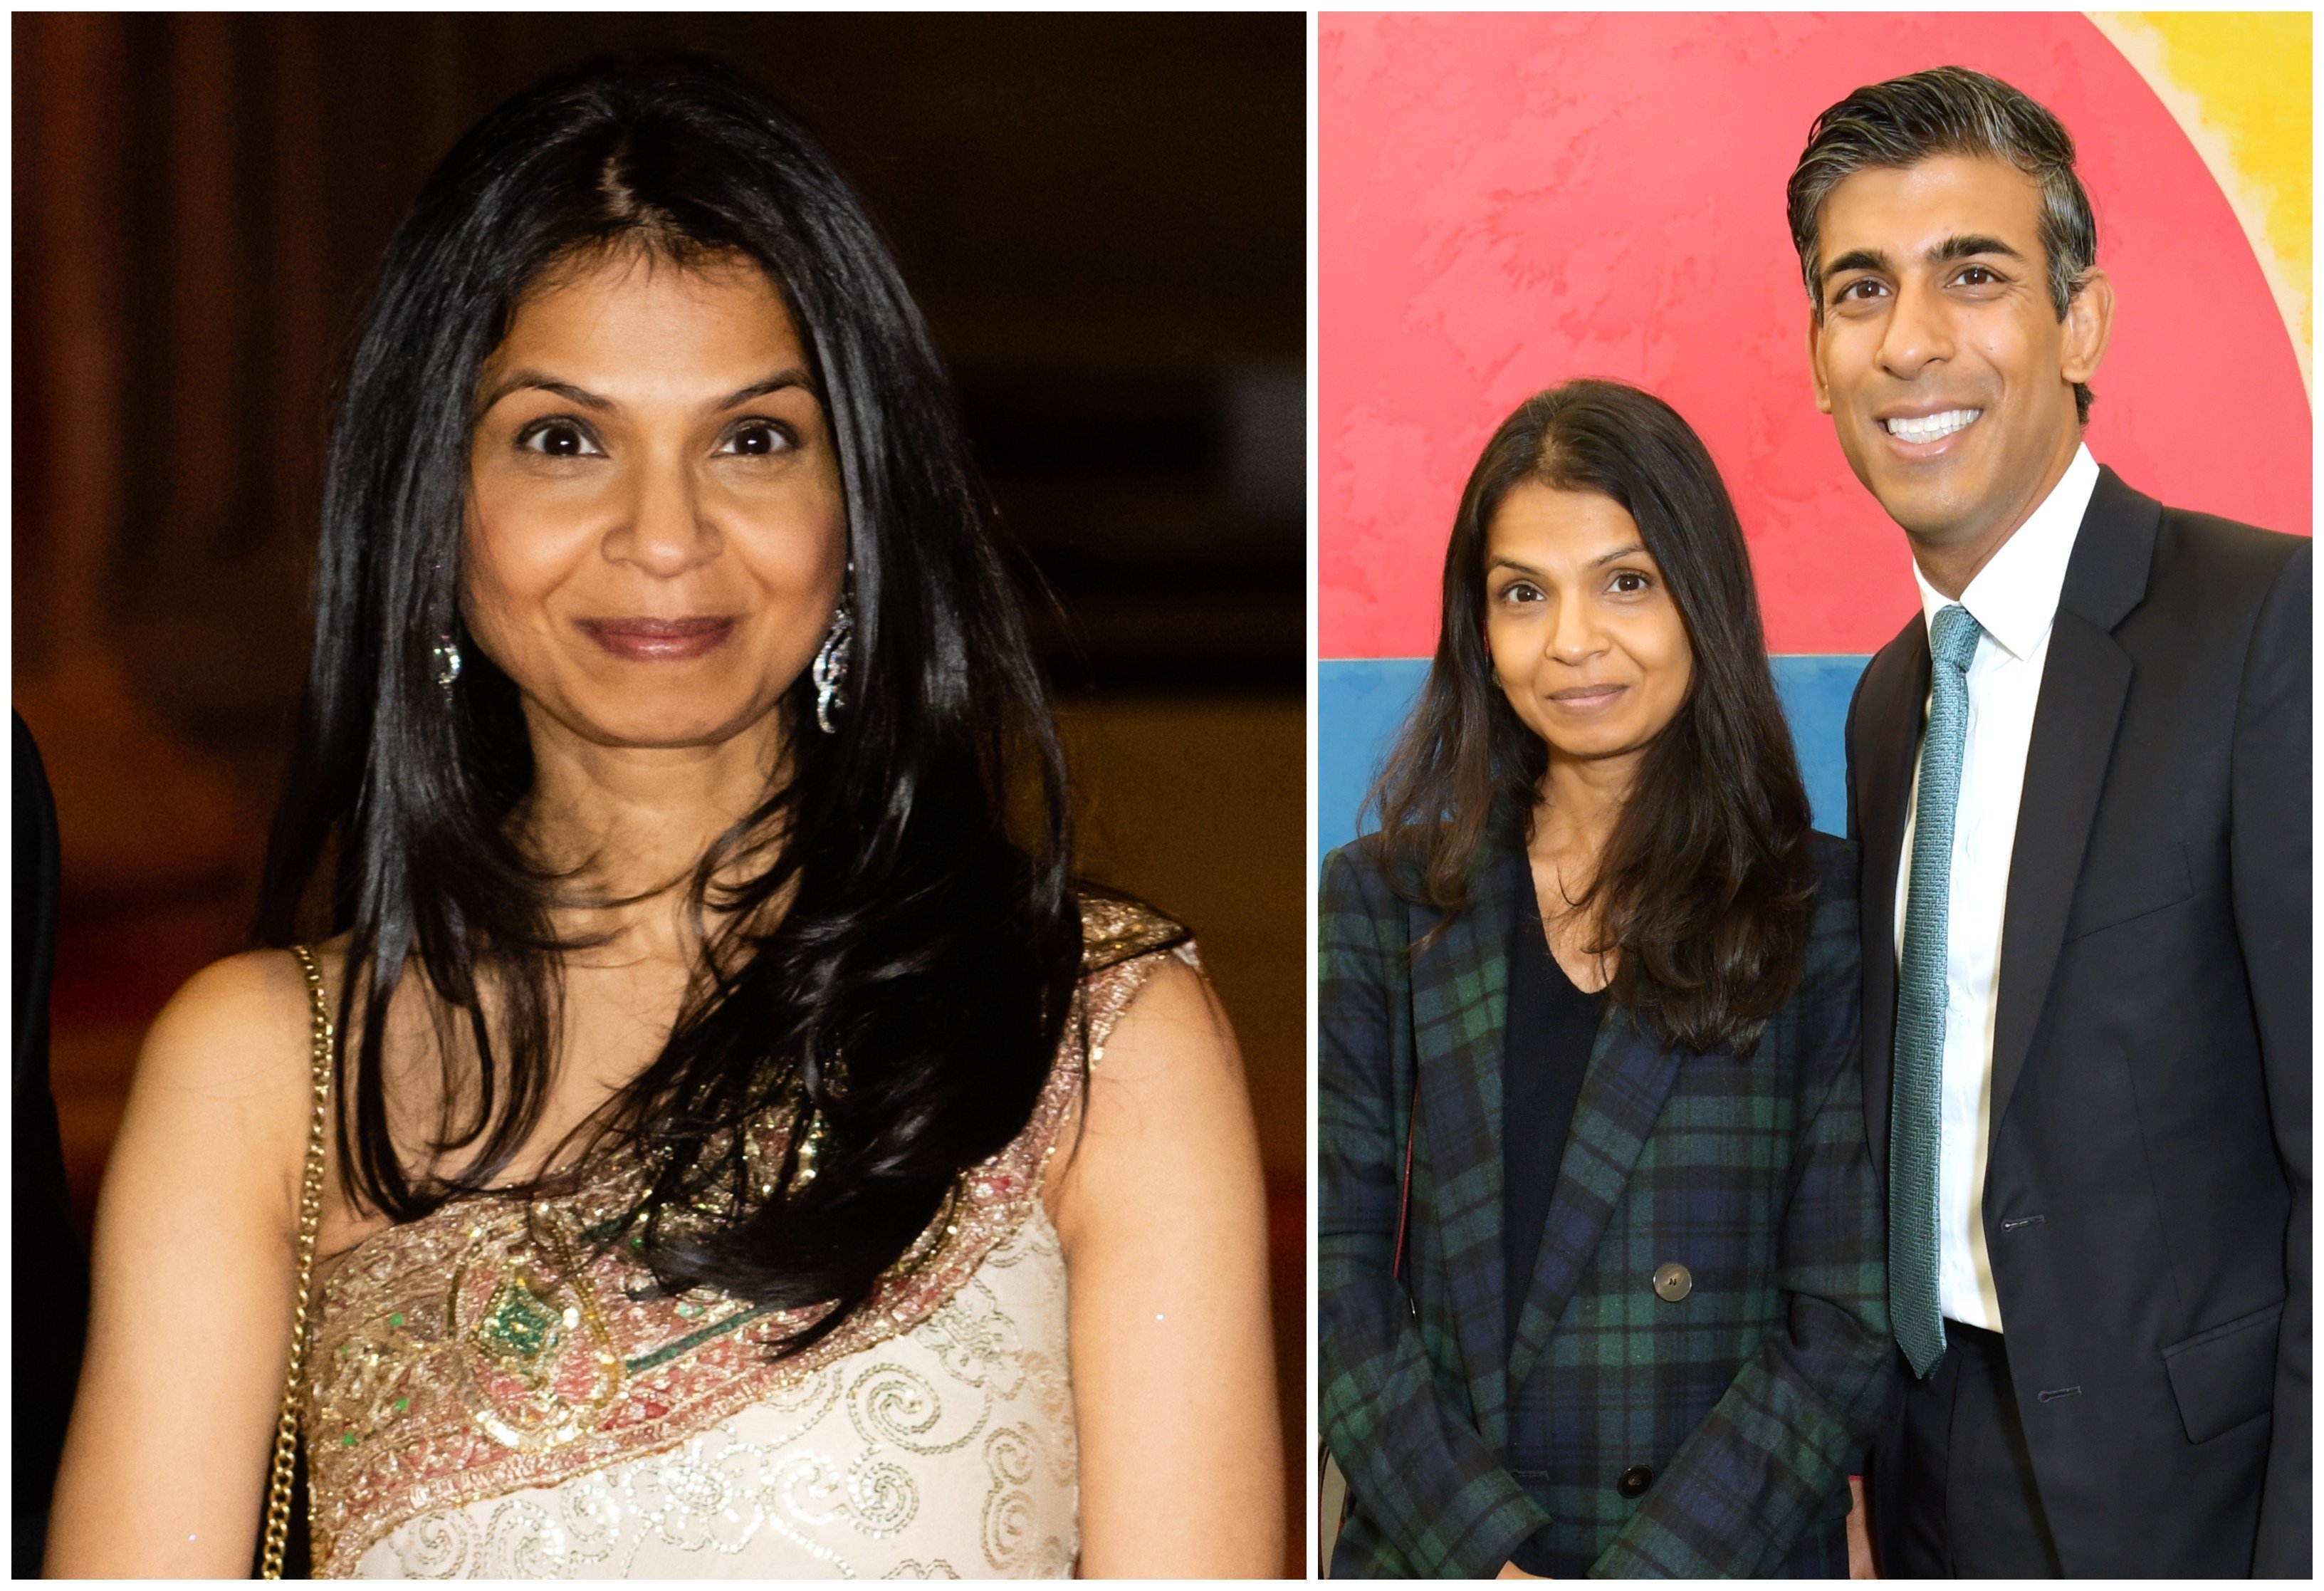 The wife of UK’s next prime minister Rishi Sunak, Akshata Murthy, comes from a wealthy family. Photos: WireImage, Getty Images